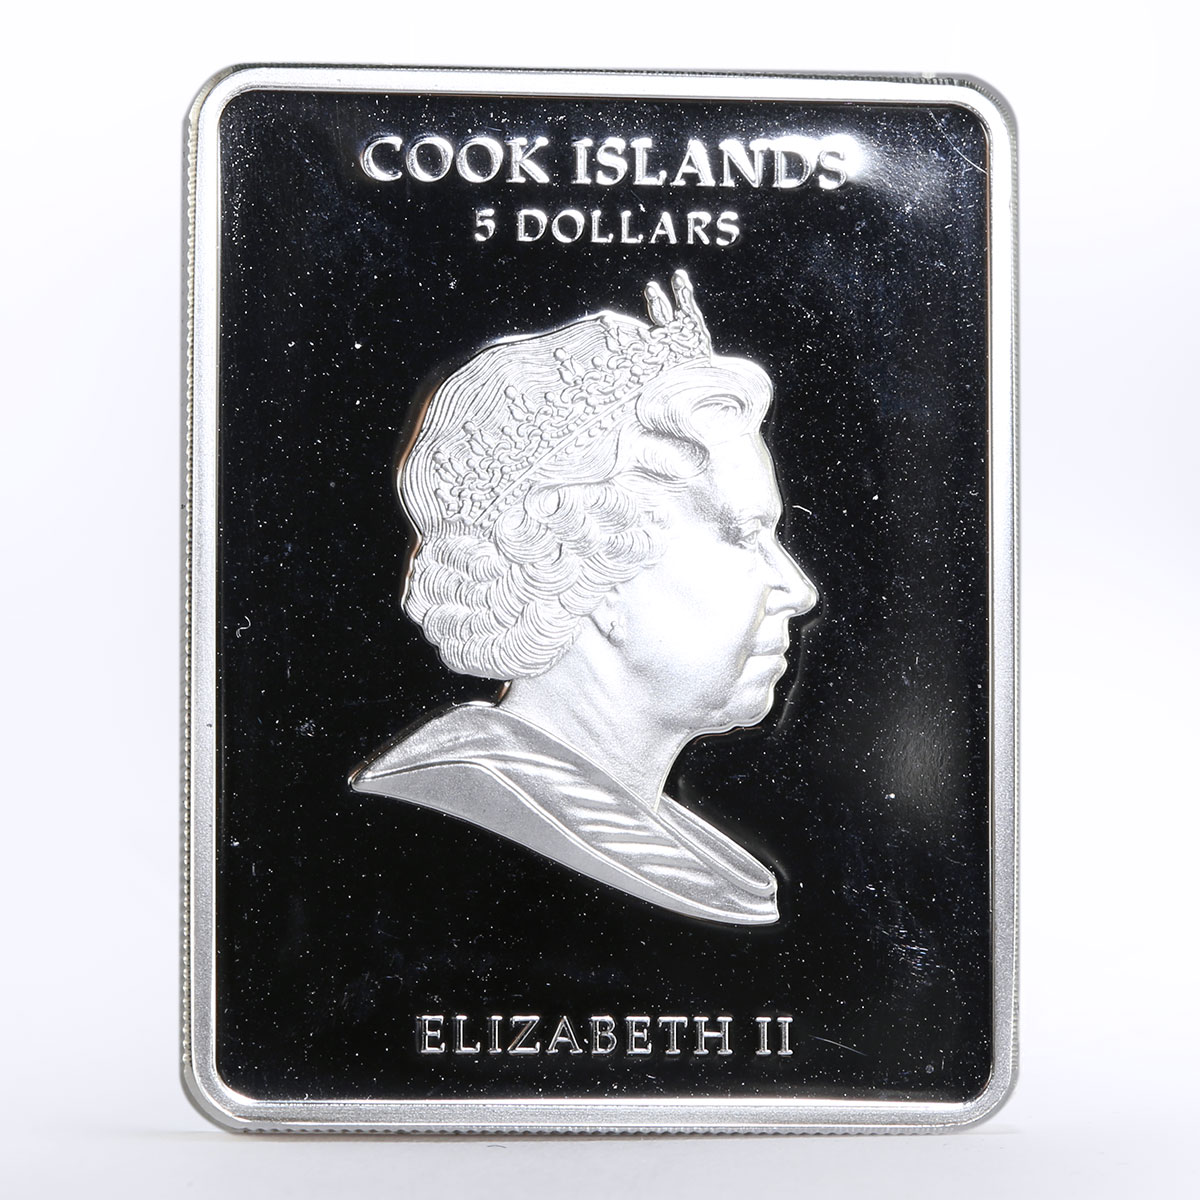 Cook Islands 5 dollars Fainth and Icons series Saint Helena silver coin 2010